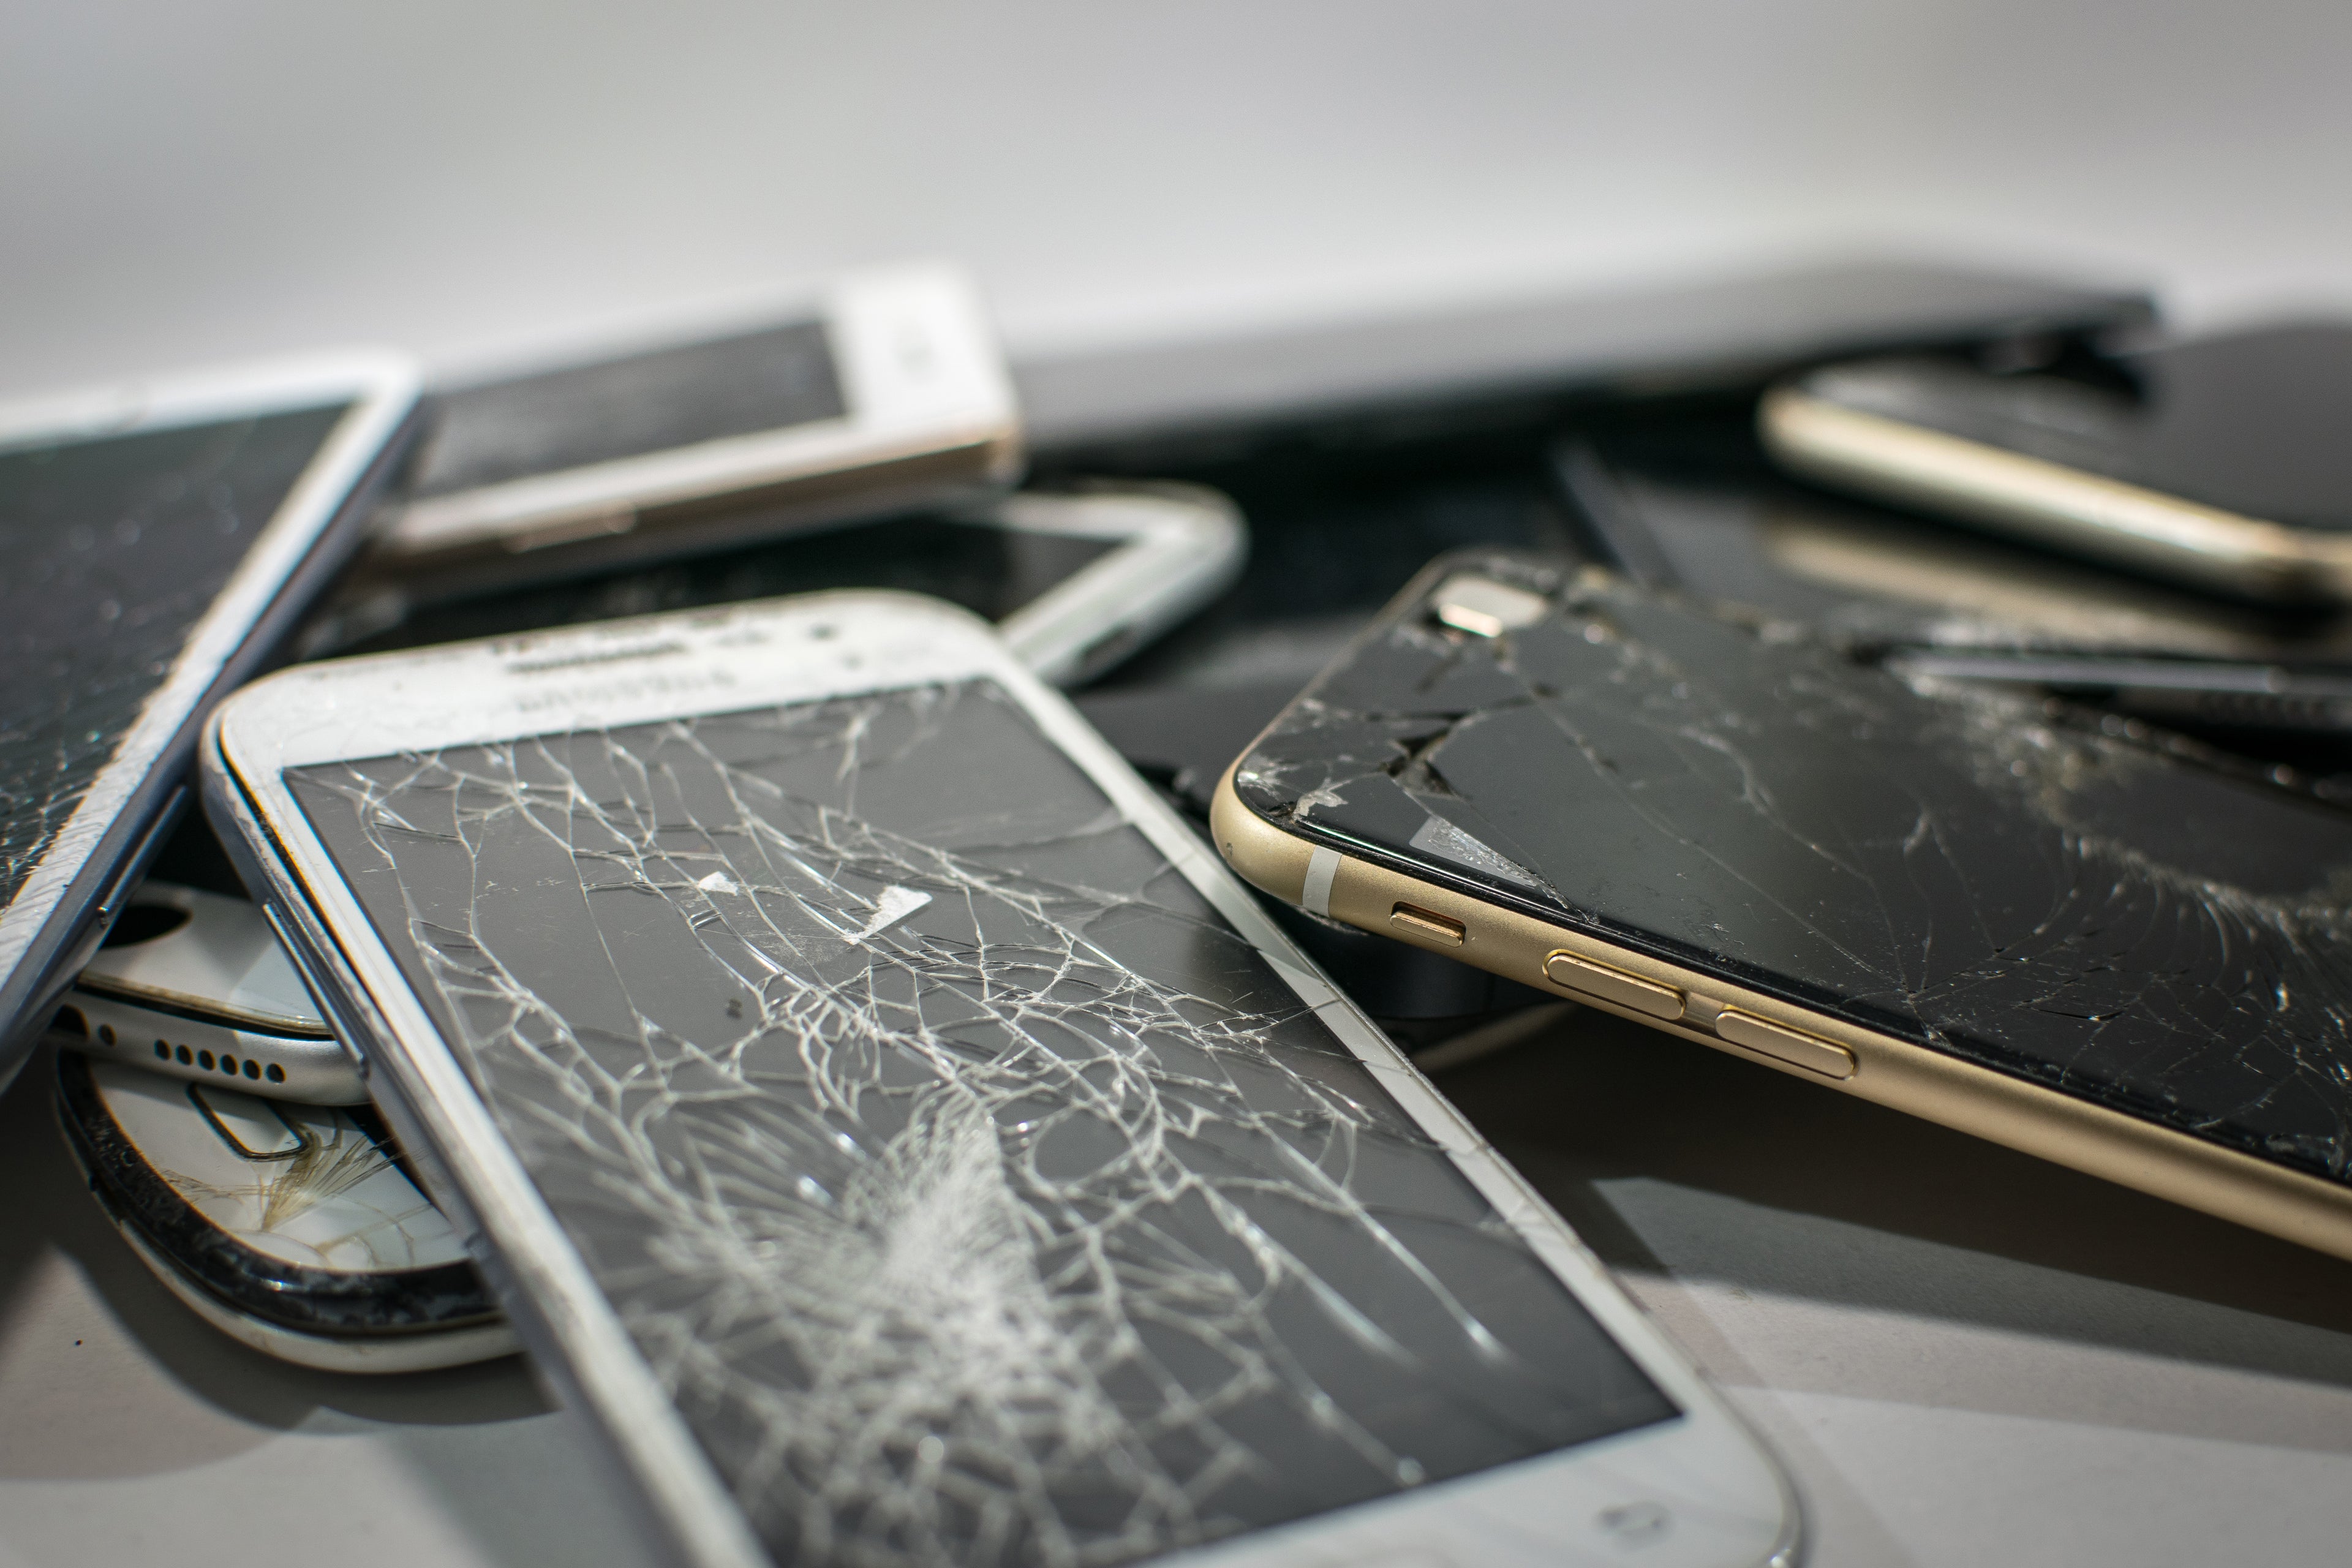 phones with cracked and broken screens lay in a pile